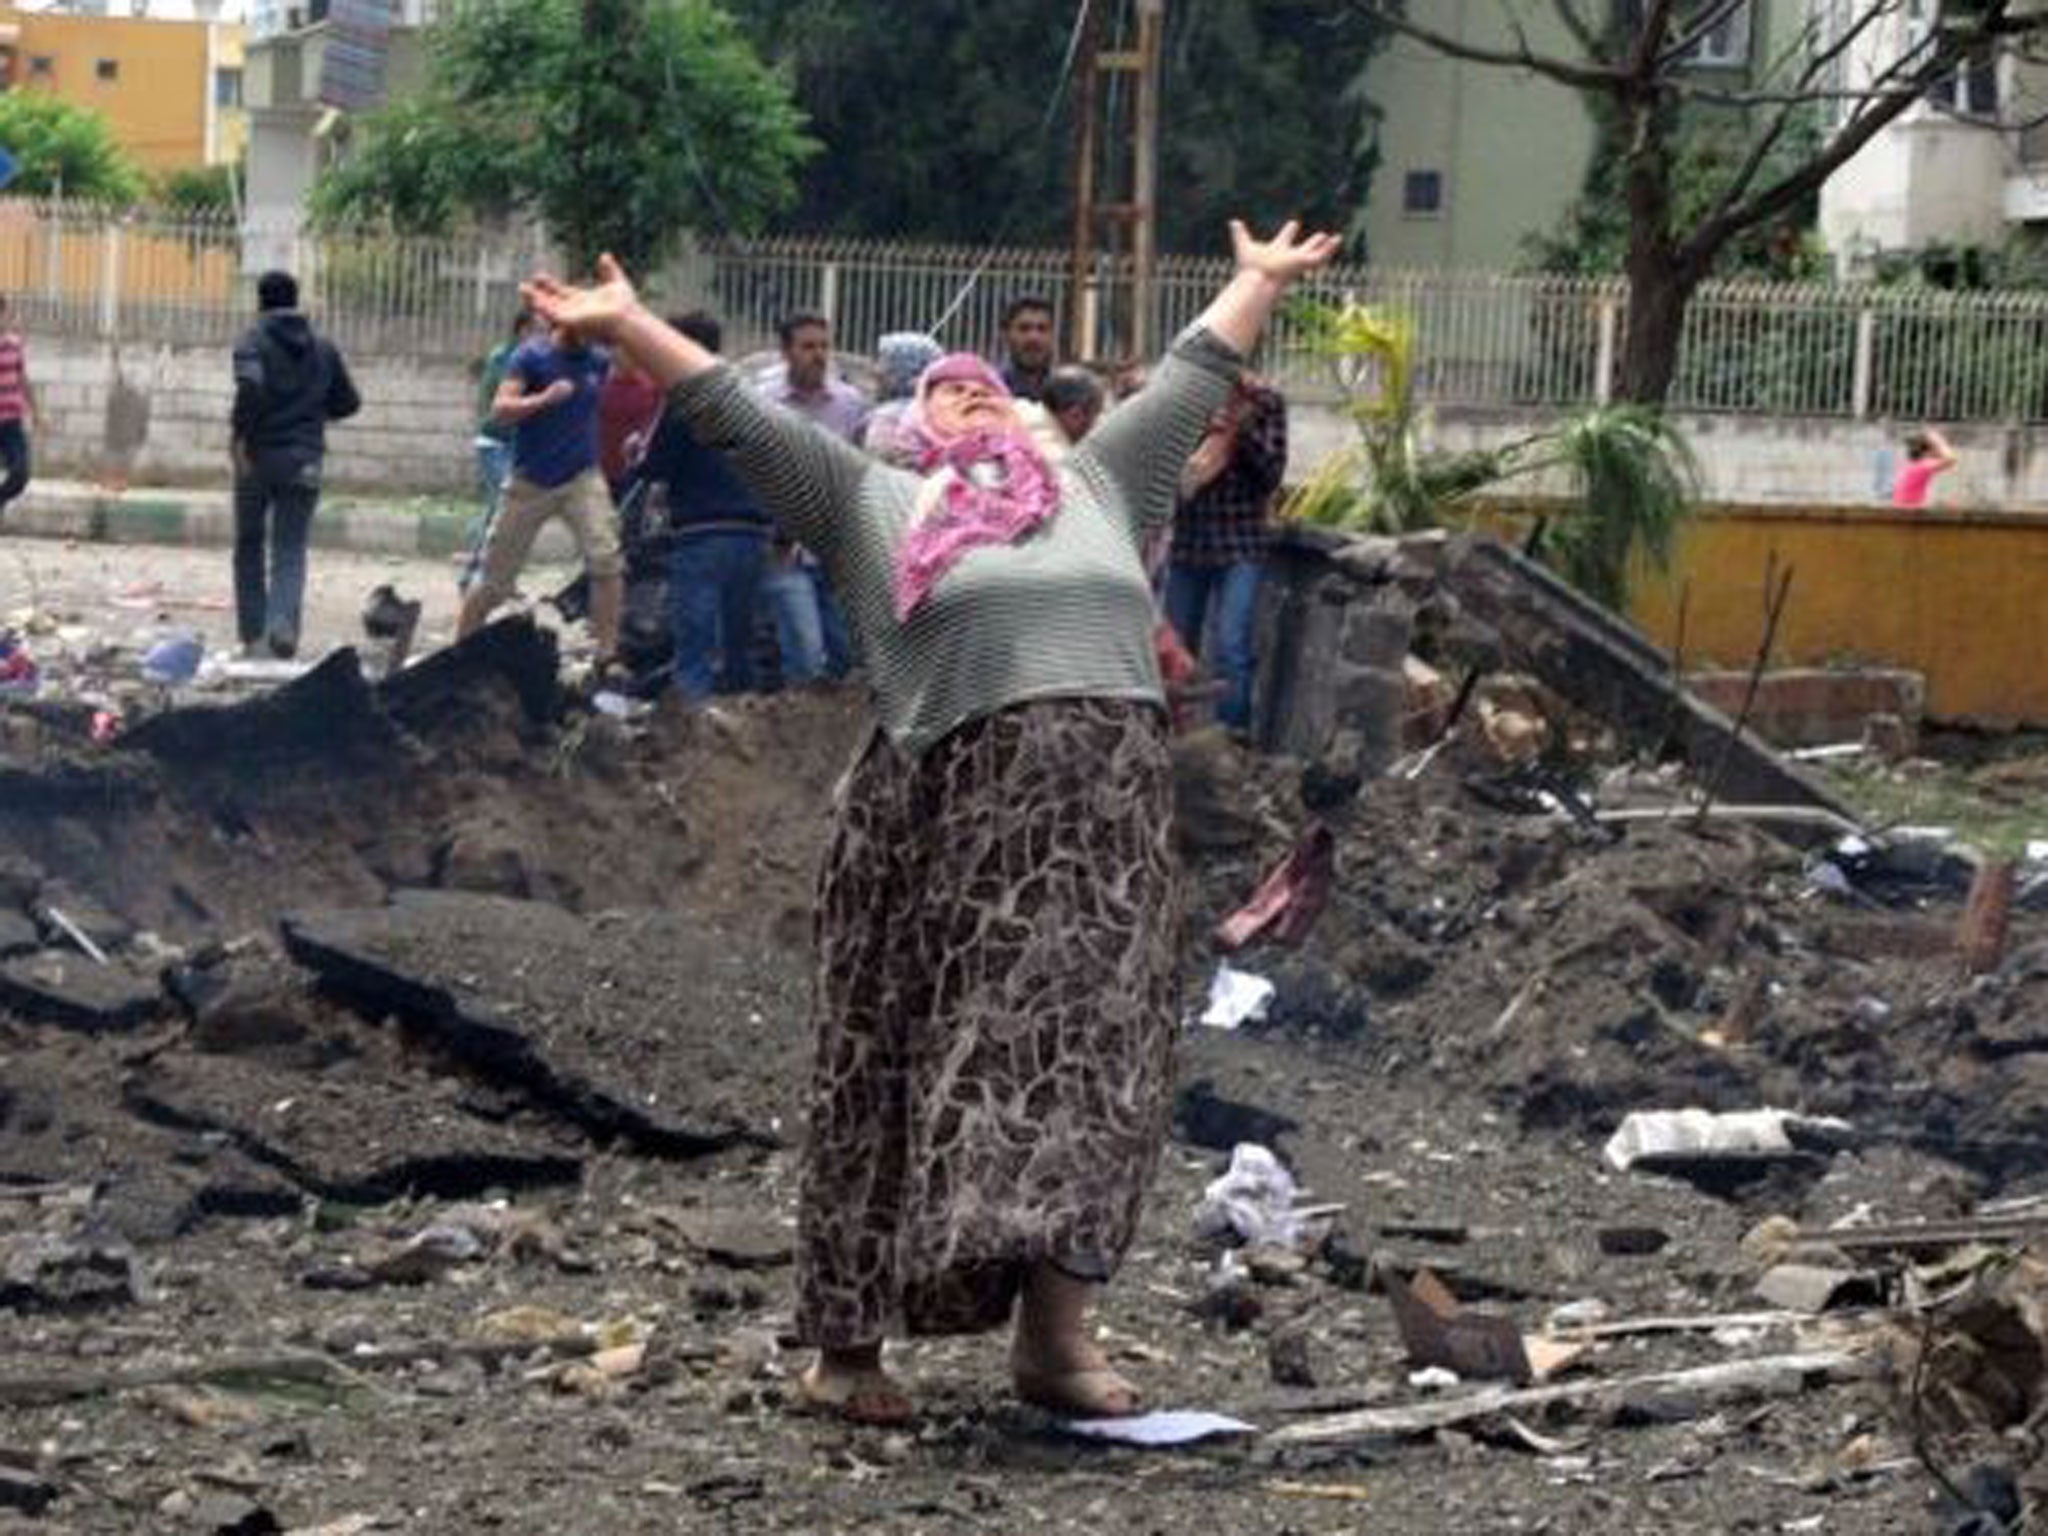 A woman reacts after the explosion in Rayhanli District, Hatay